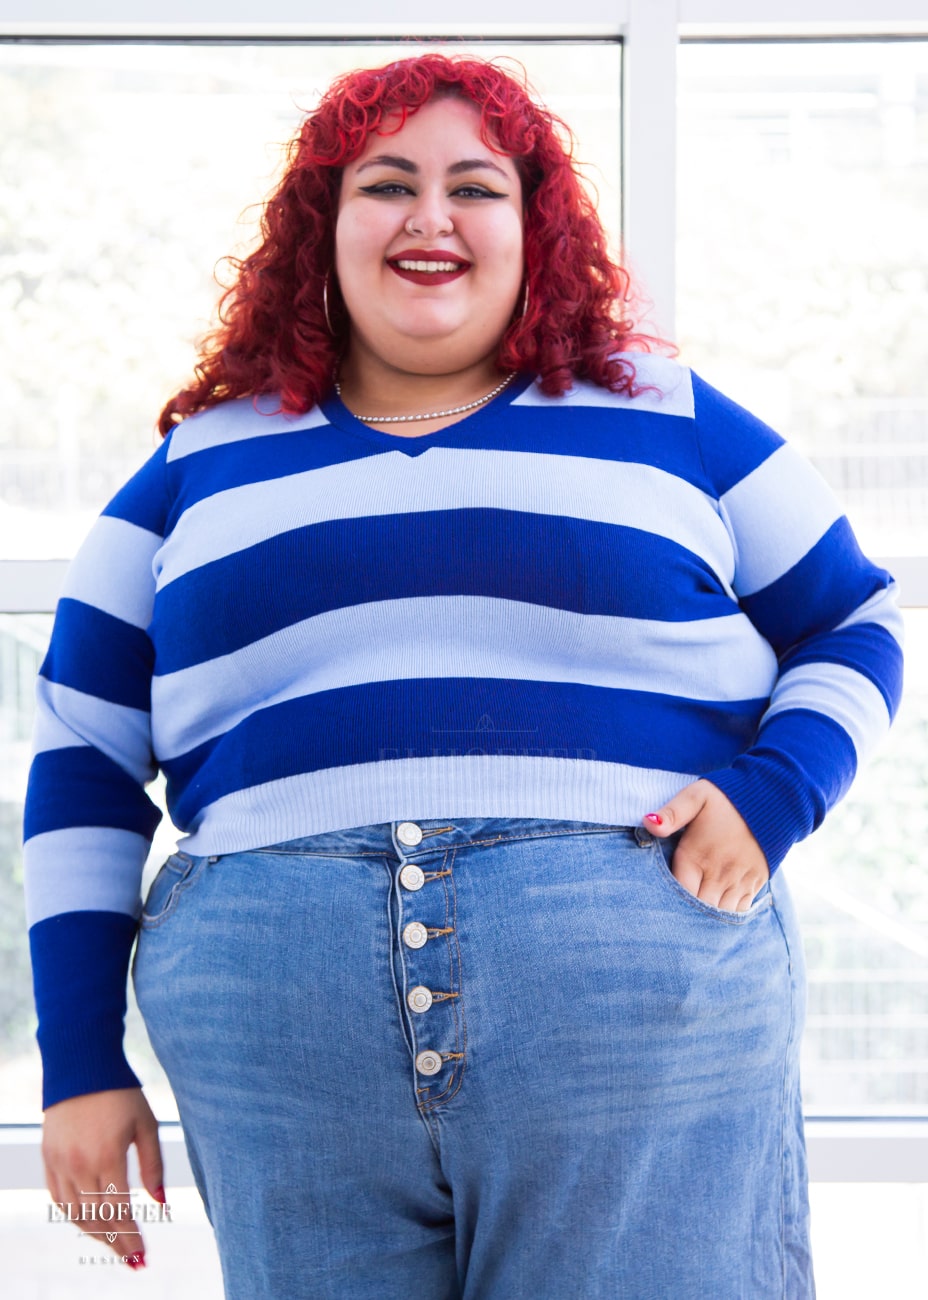 Victoria, an olive skinned size 4XL model with bright red curly hair, is wearing a cropped v-neck sweater with fitted full length sleeves in horizontal thick stripes of bright blue and light blue.